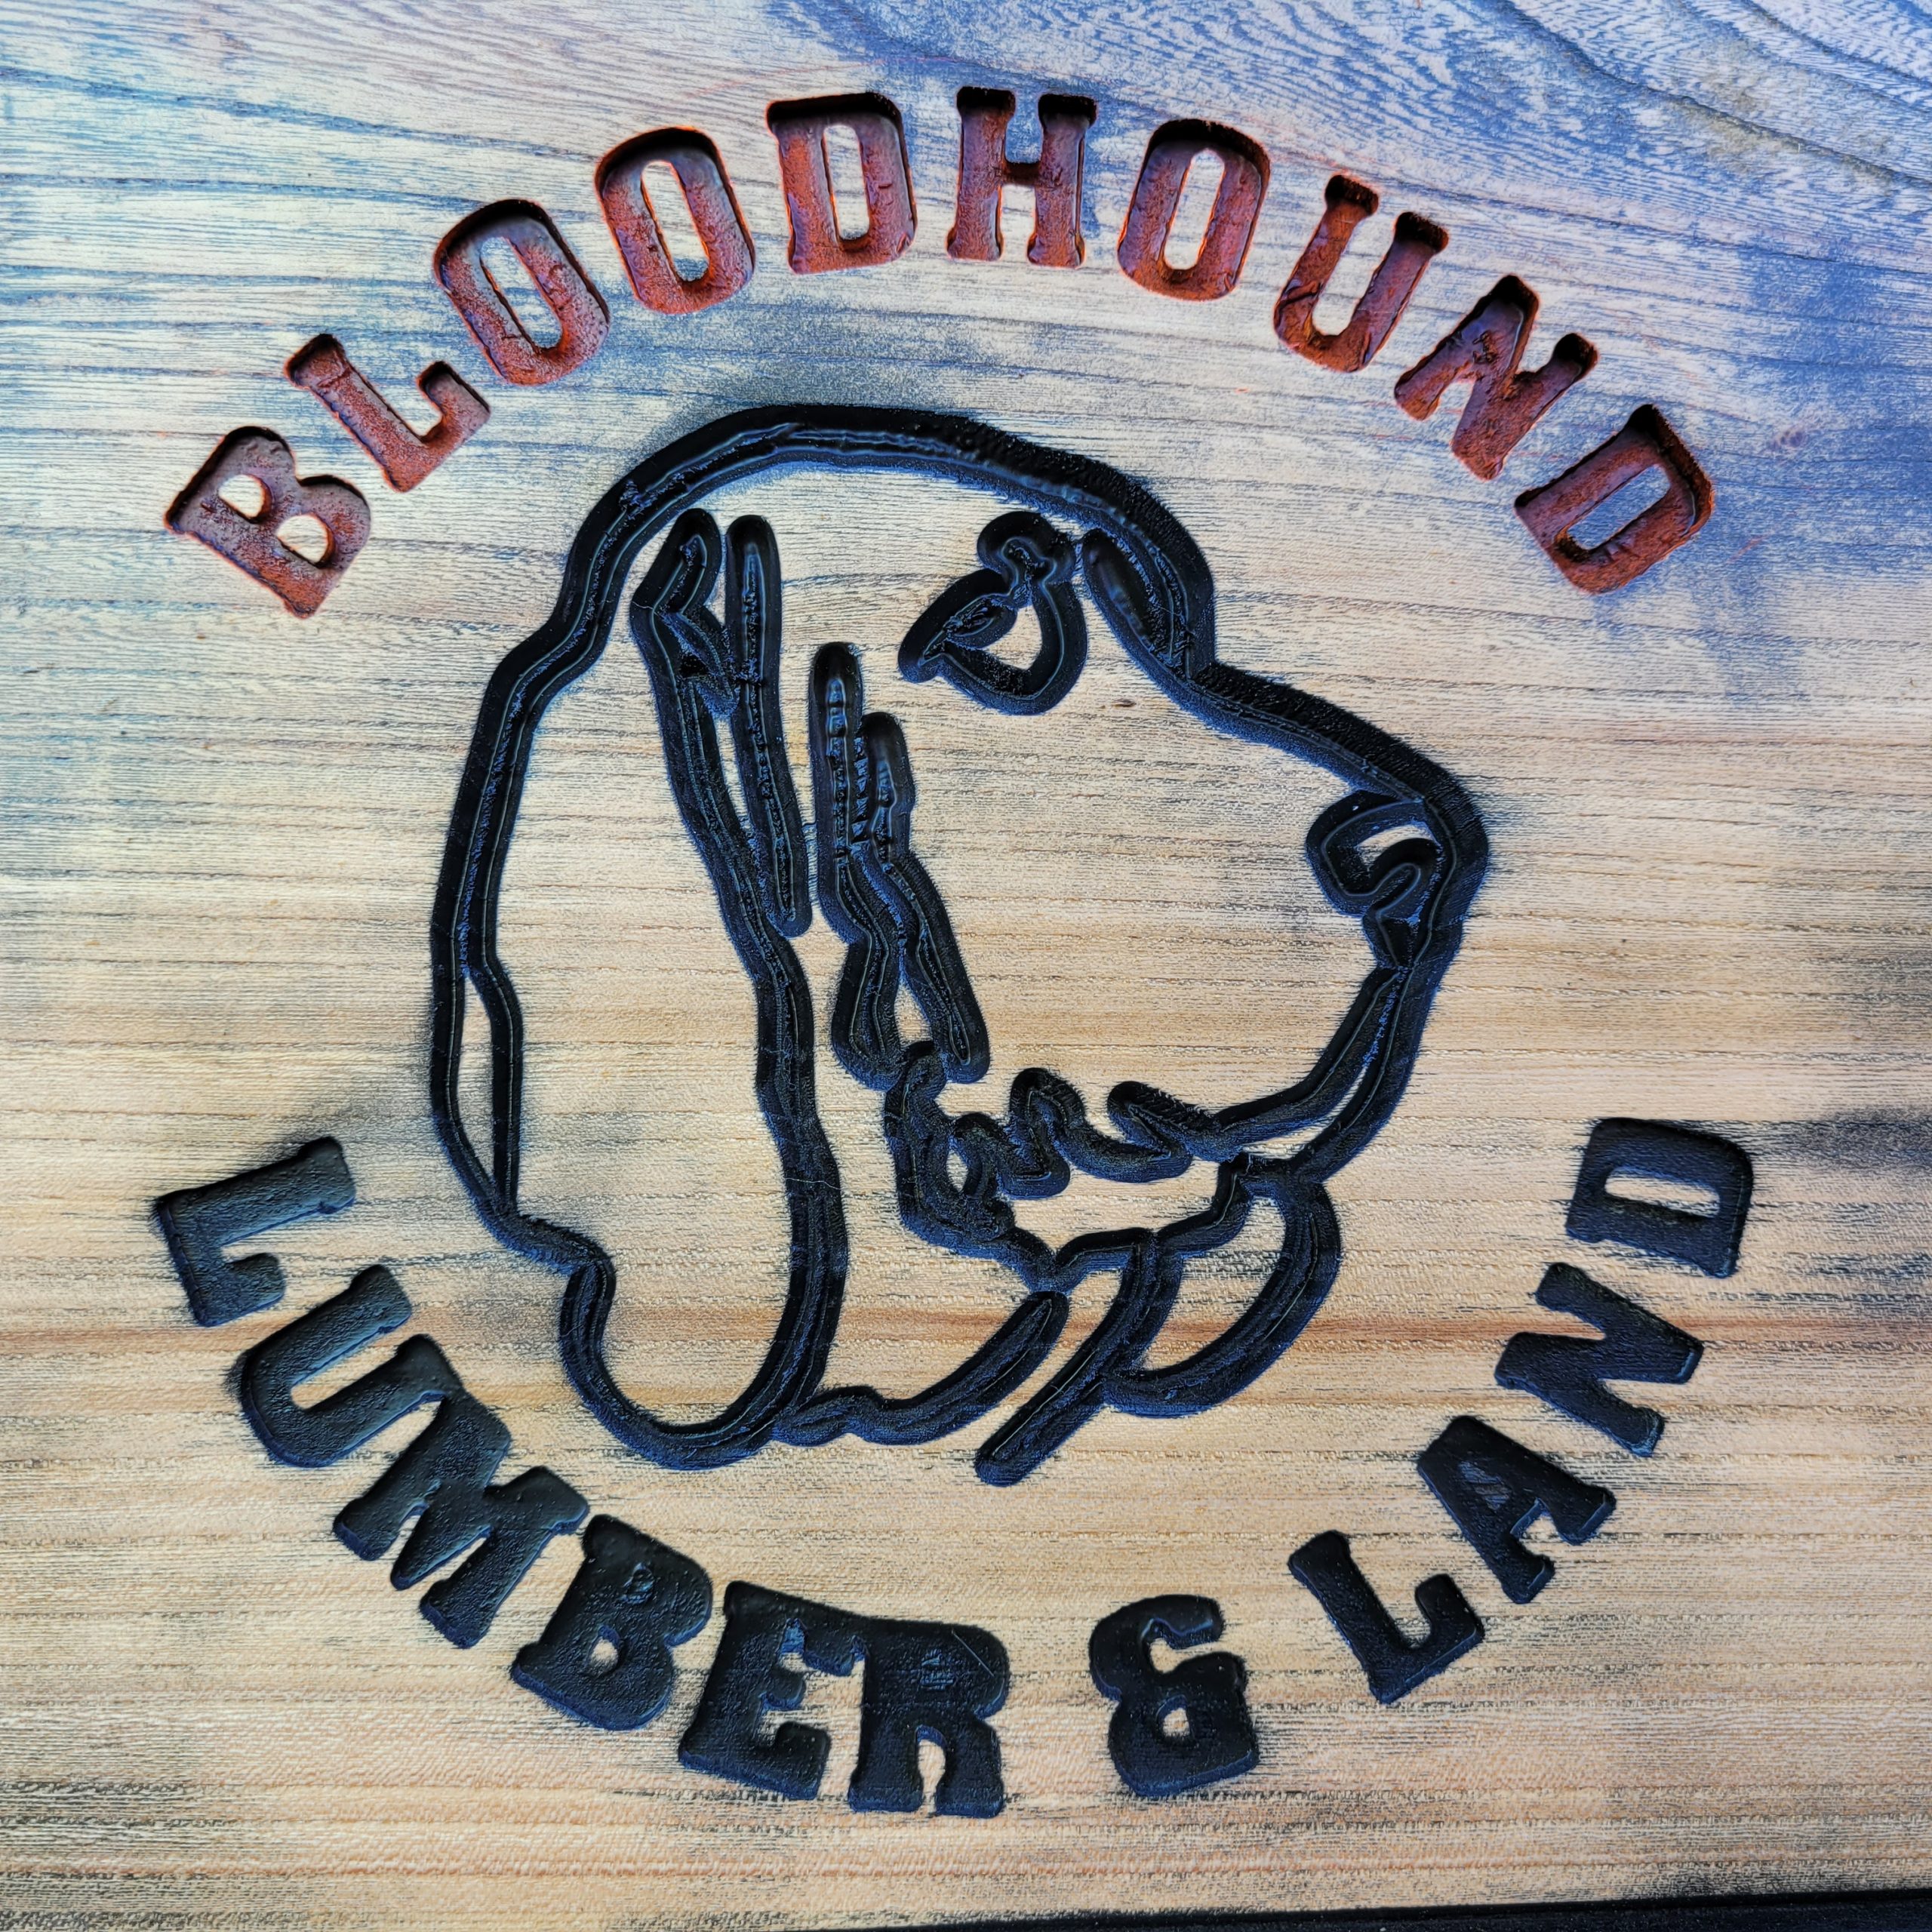 About Bloodhound Lumber and Land